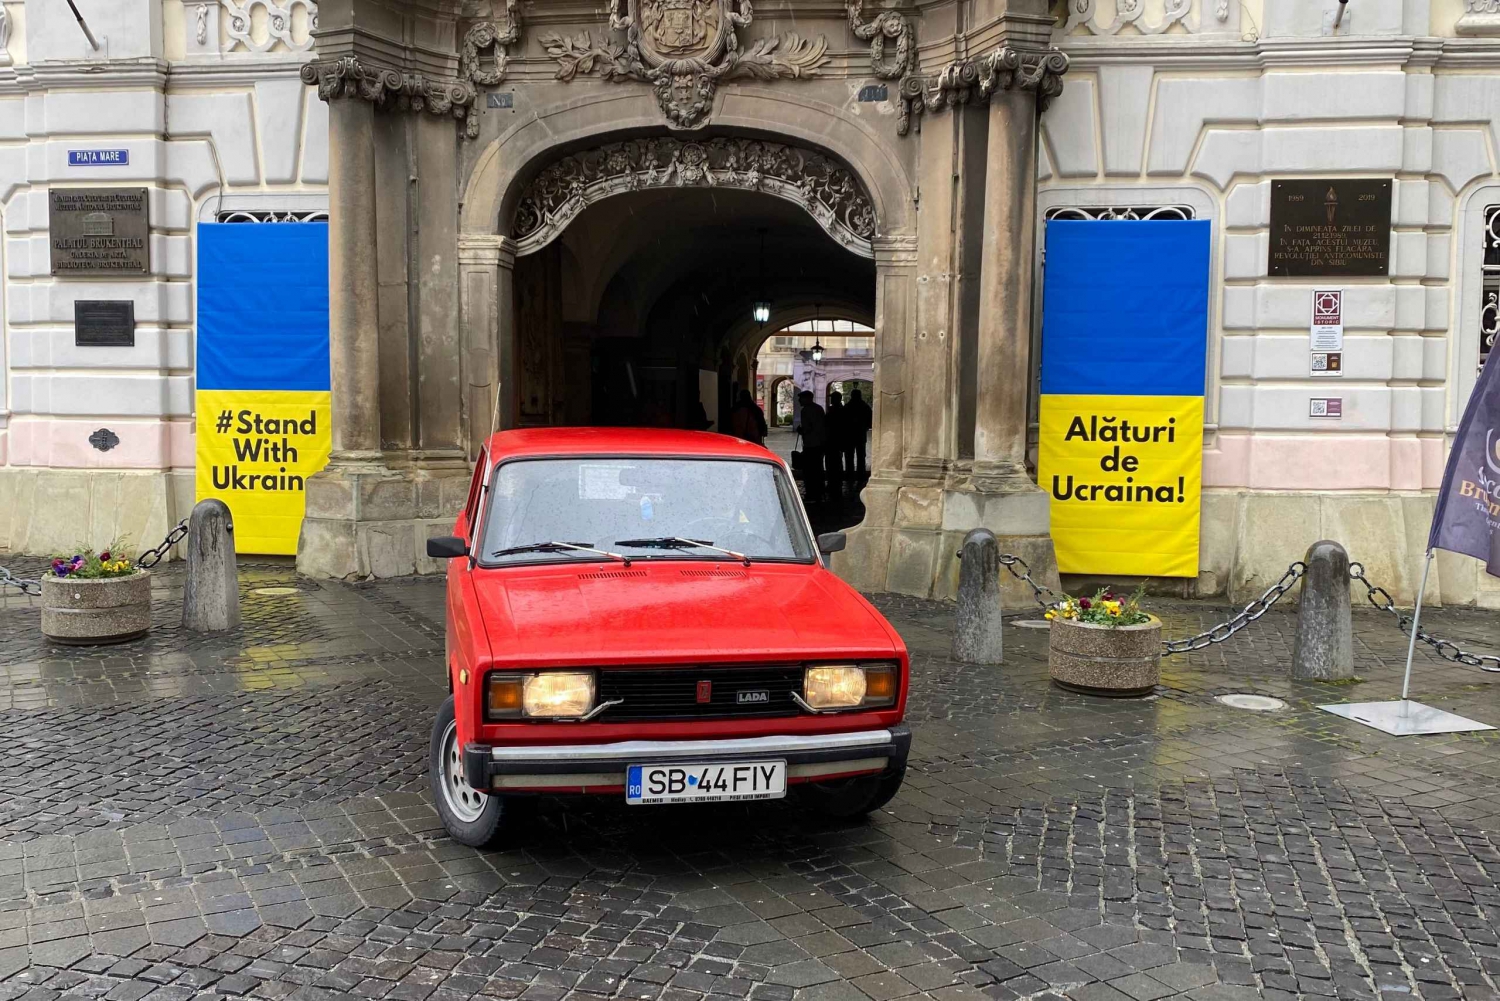 Medias: Private Tour in Vintage Car with Fortified Churches